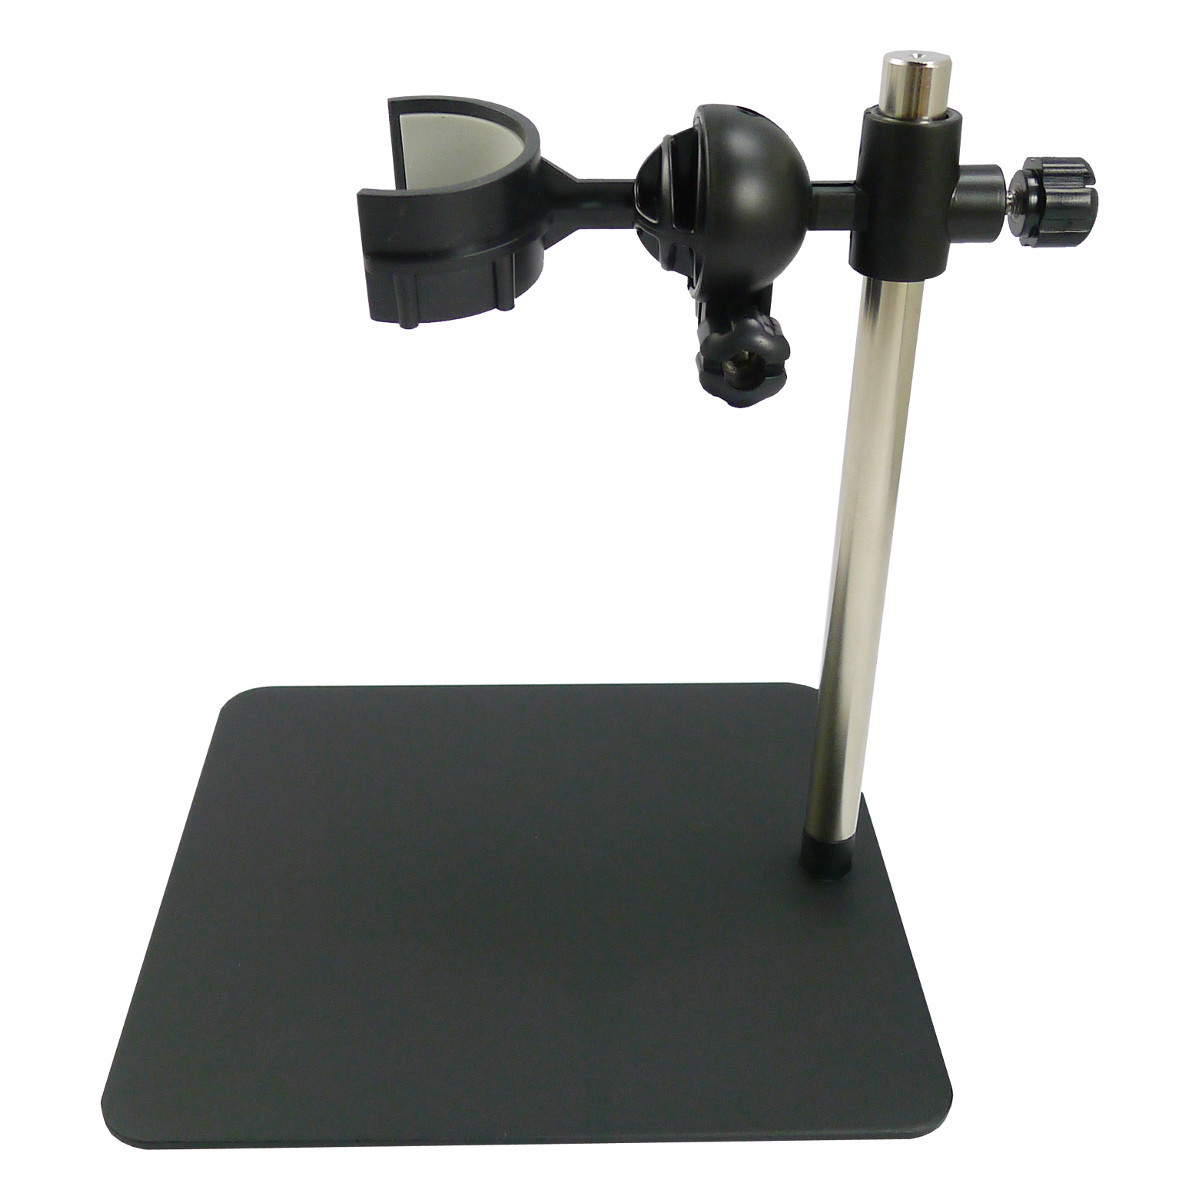 Midas® Digital Inspection System - New Boom Stand - Side View